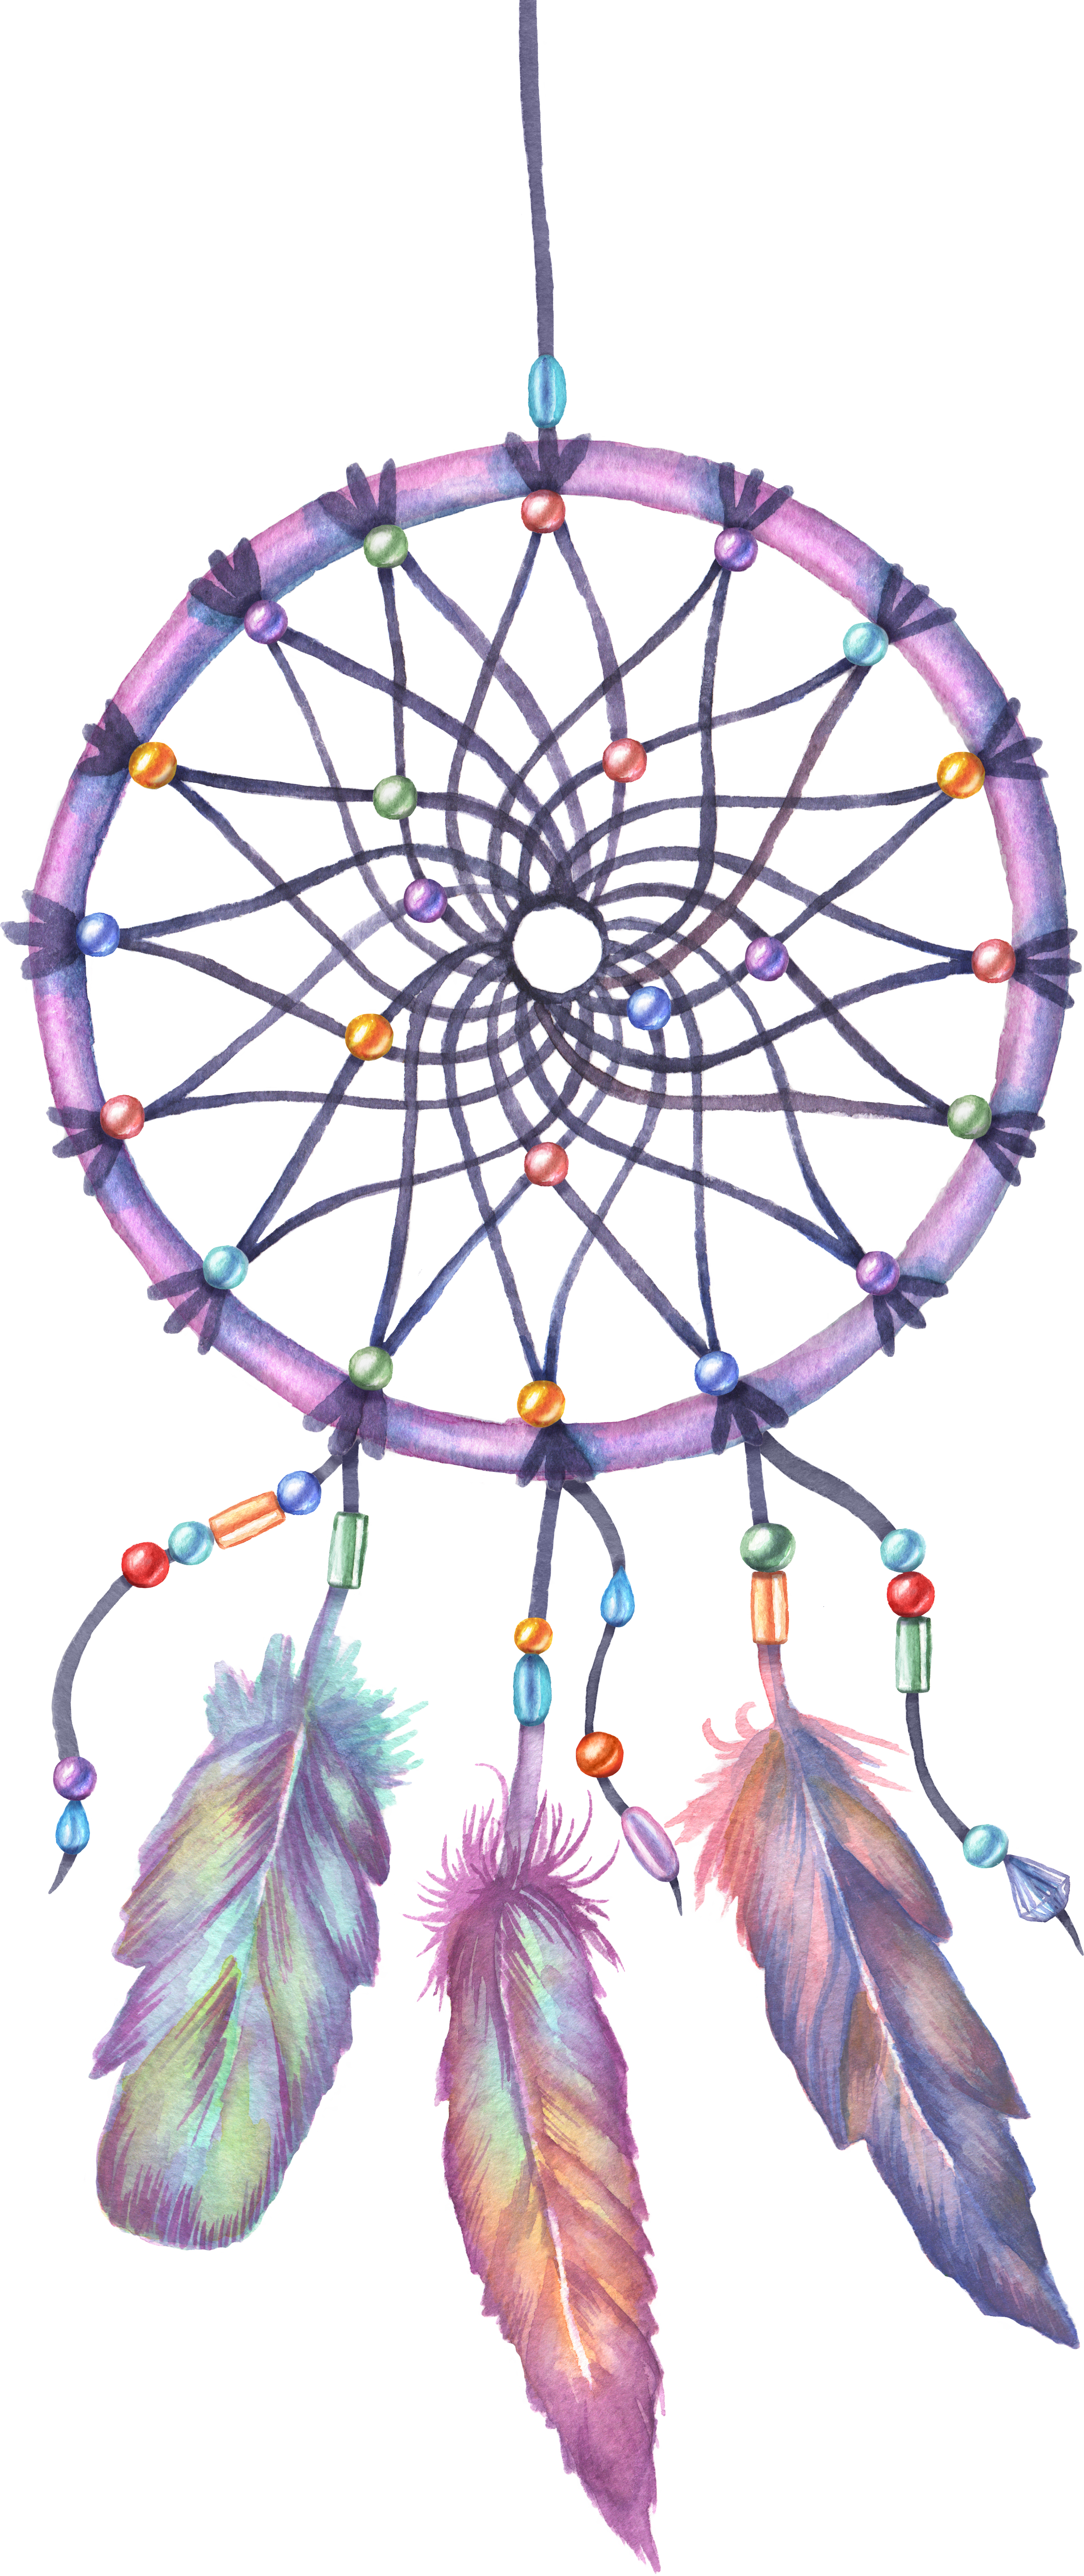 Drawing Dreamcatcher Free Transparent Image HD PNG Image